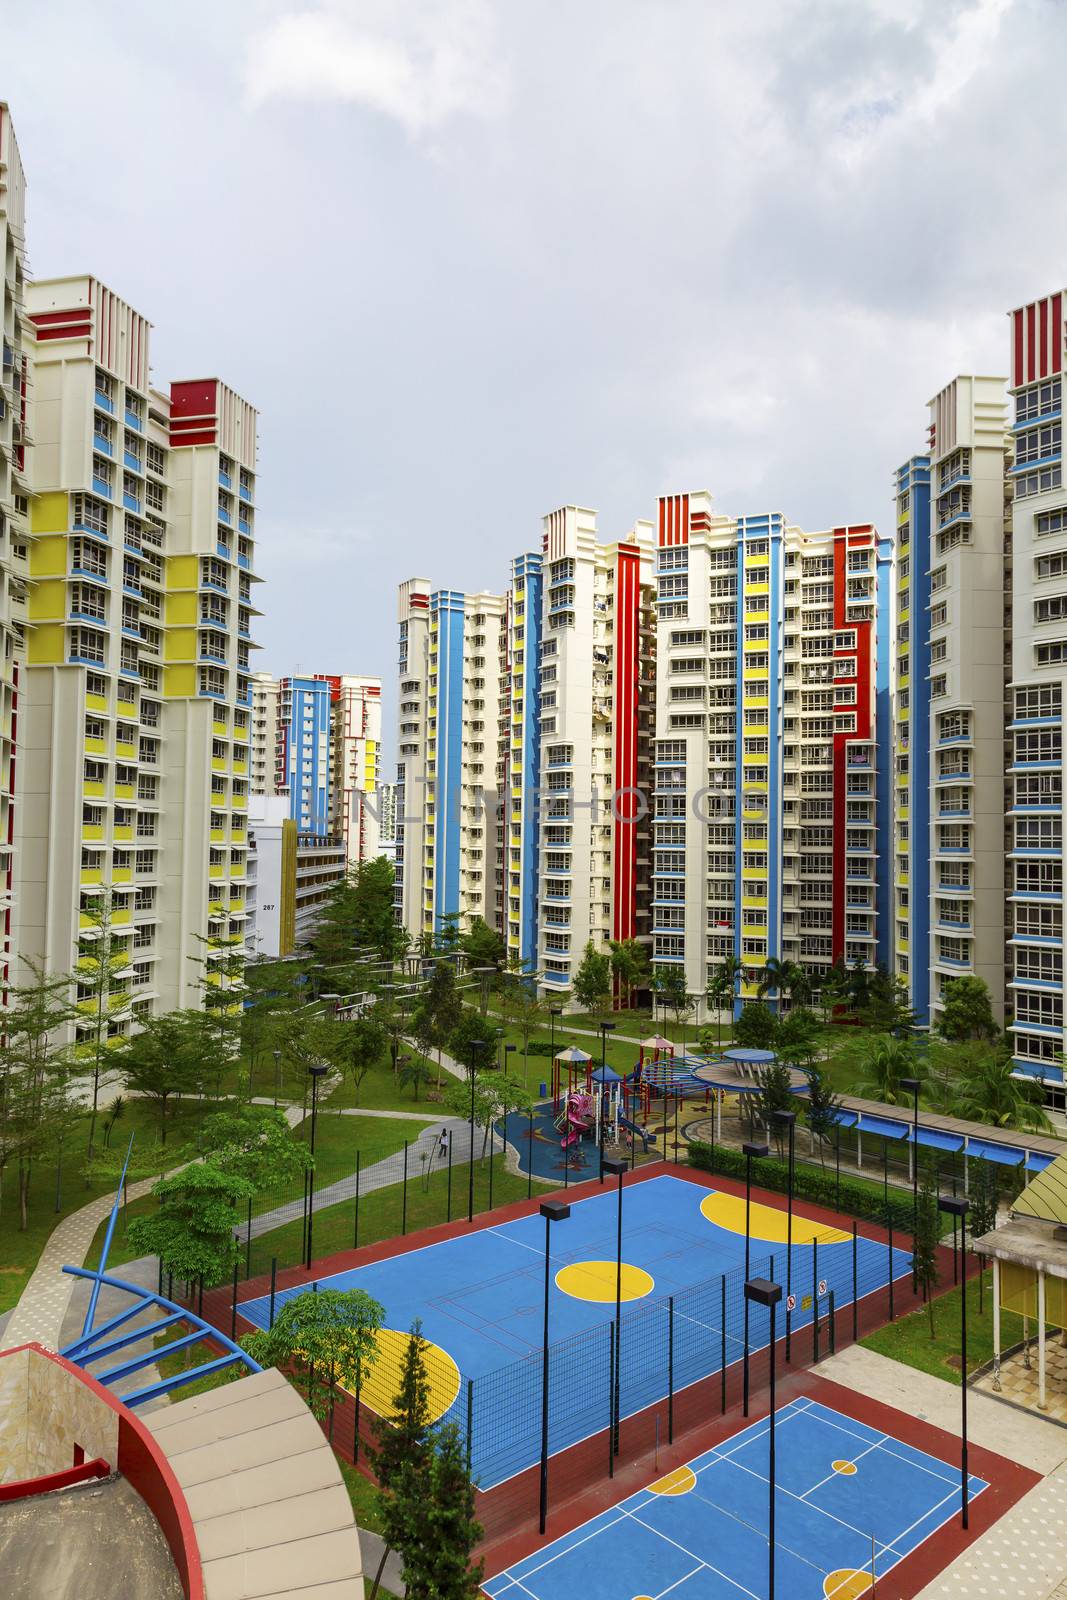 A new colorful neighborhood estate with carpark and playground.